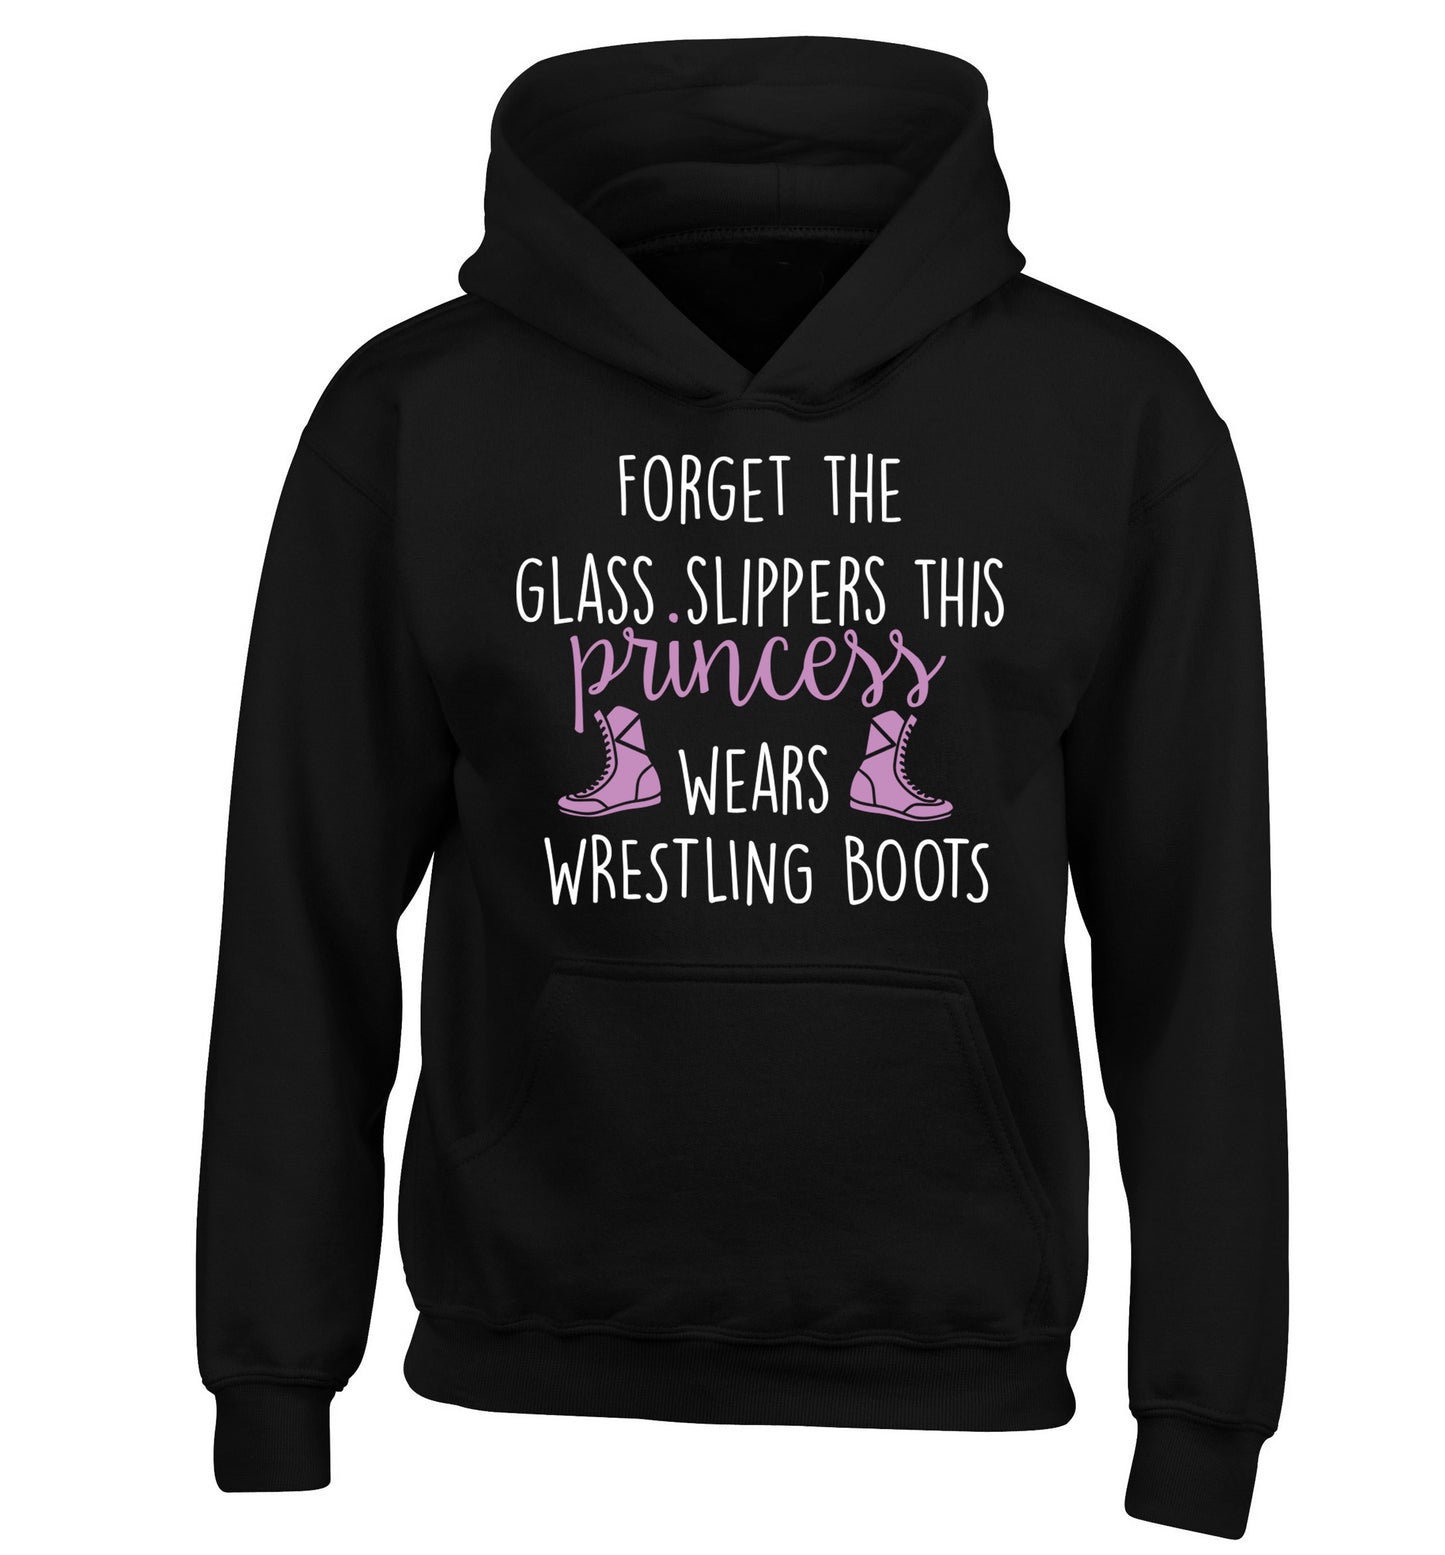 Forget the glass slippers this princess wears wrestling boots children's black hoodie 12-14 Years